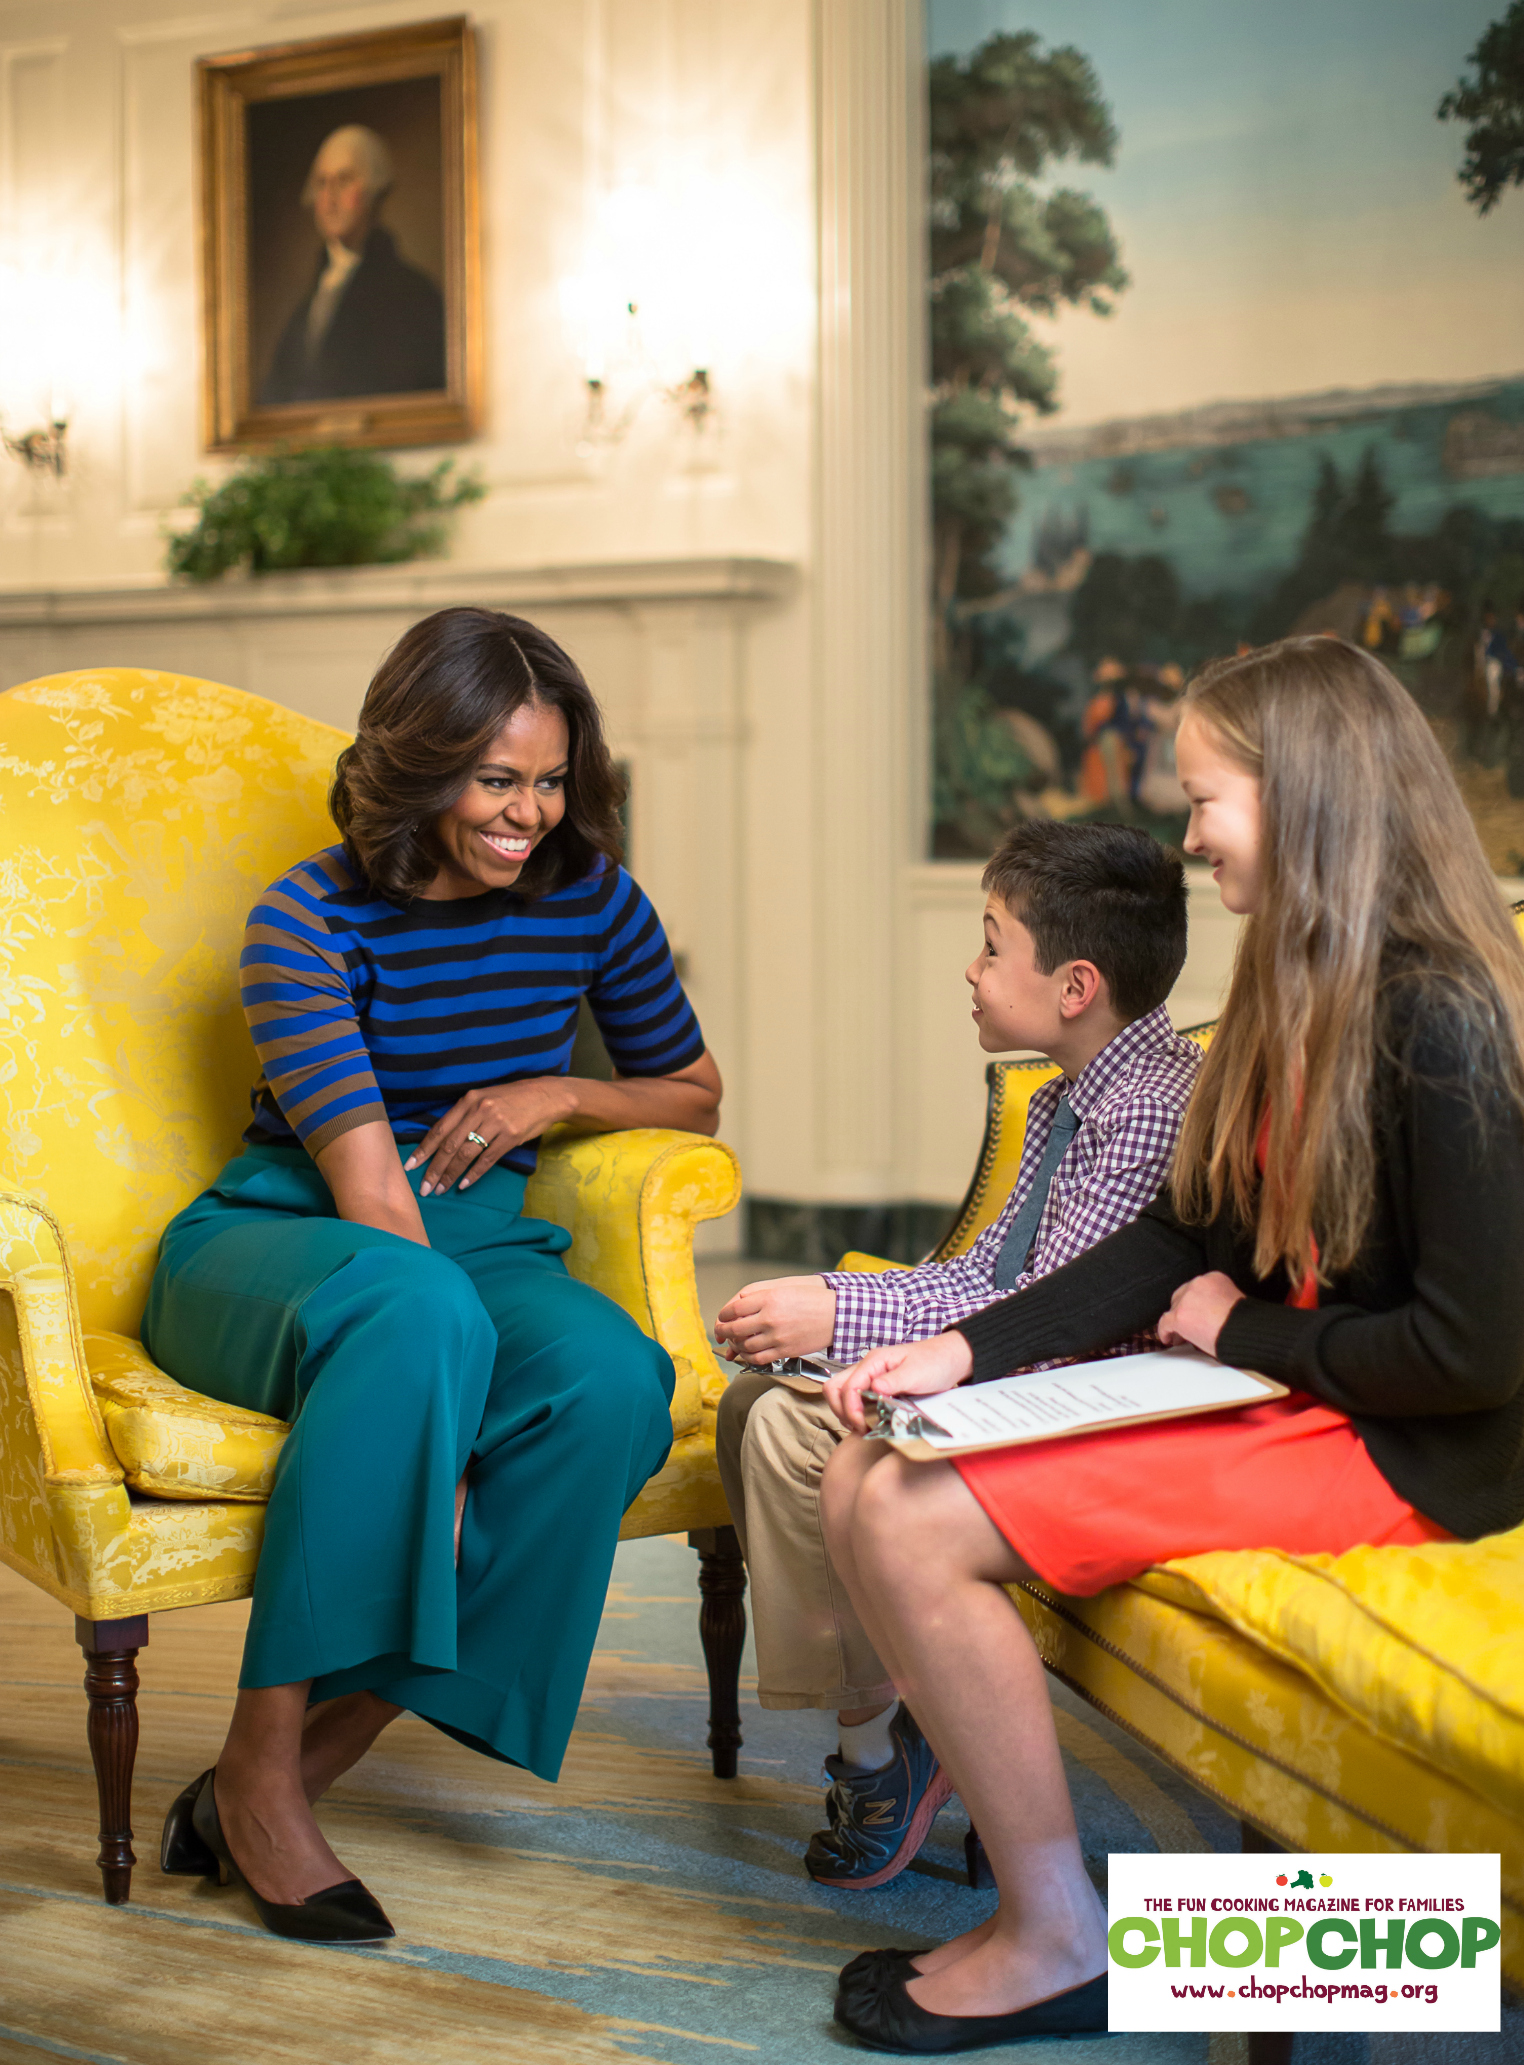 First Lady Michelle Obama with Kid Reporters Will Sprague and Olivia Harvey, in the Diplomatic Reception Room at The White House